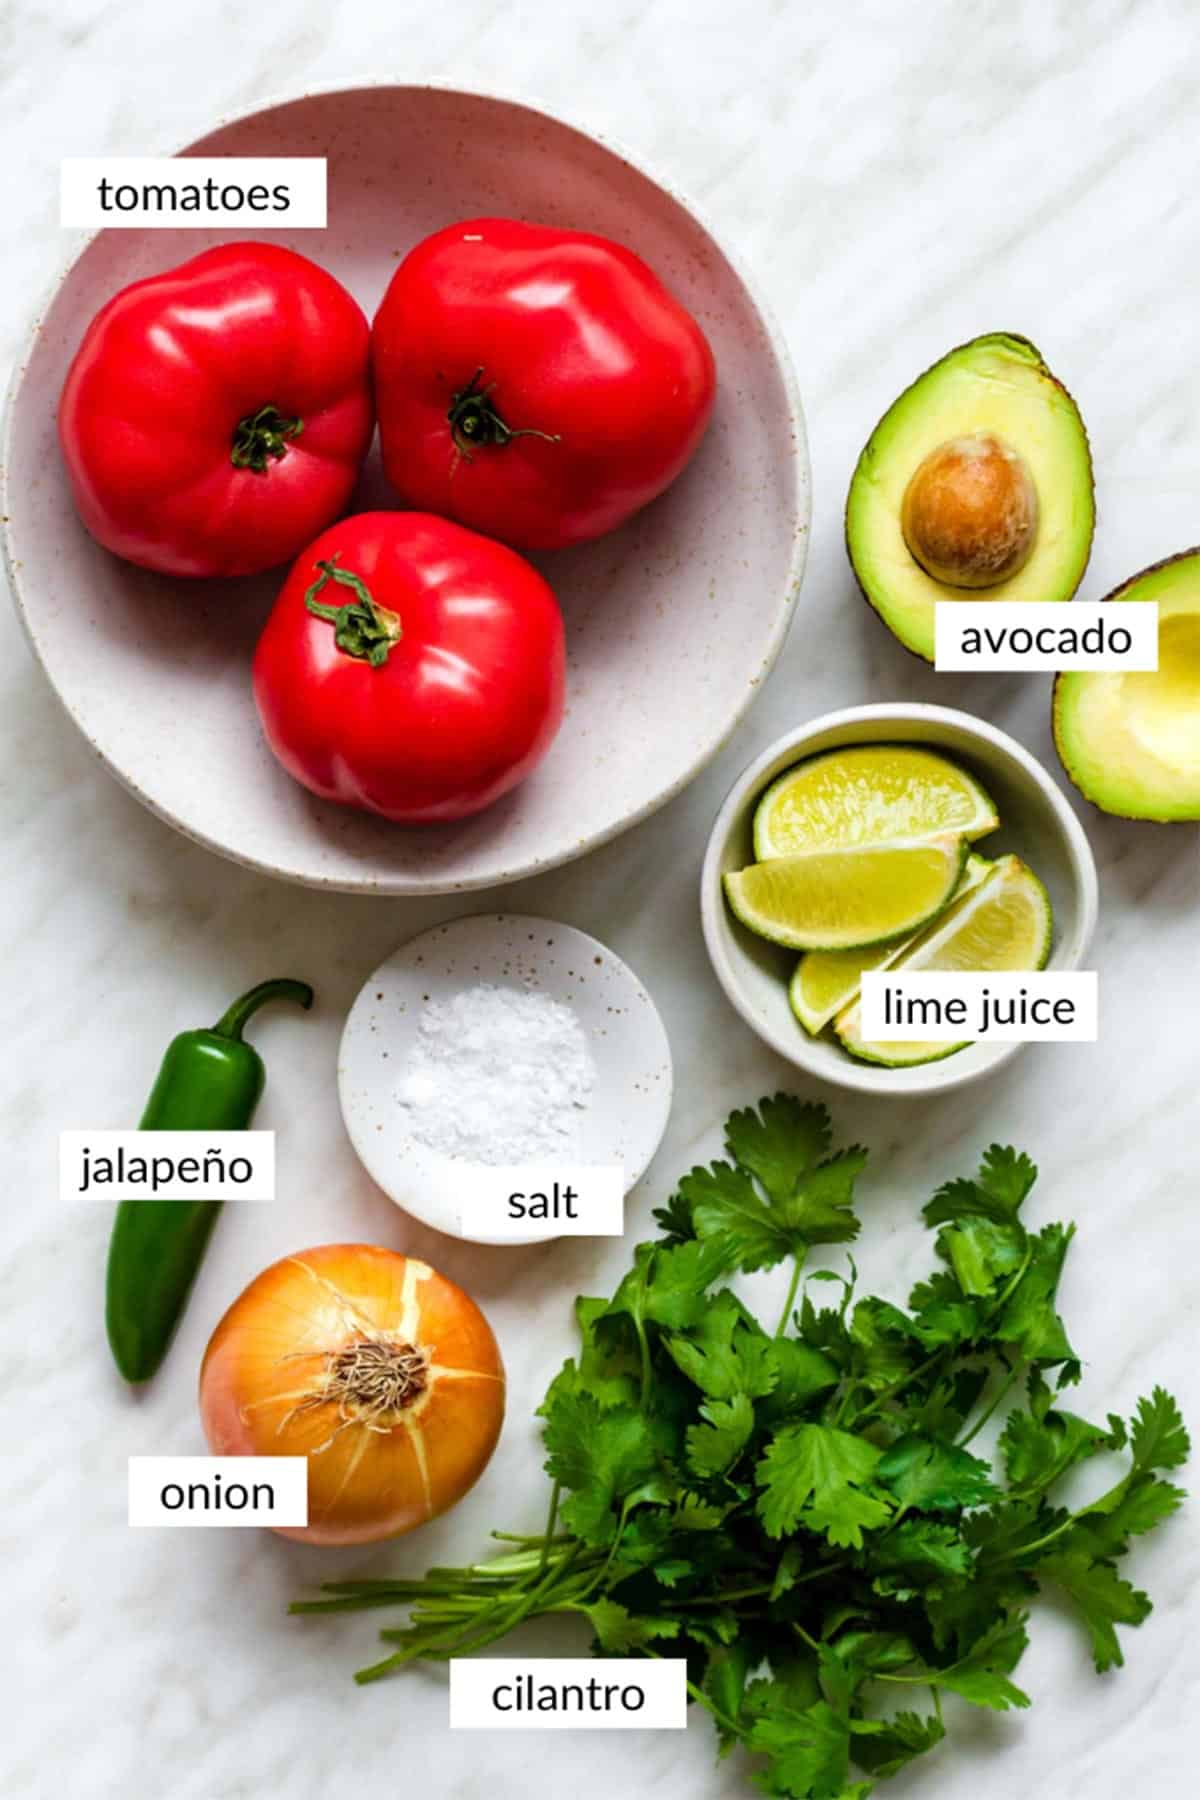 Gathered ingredients for making avocado pico de gallo with text overlay on each ingredient.